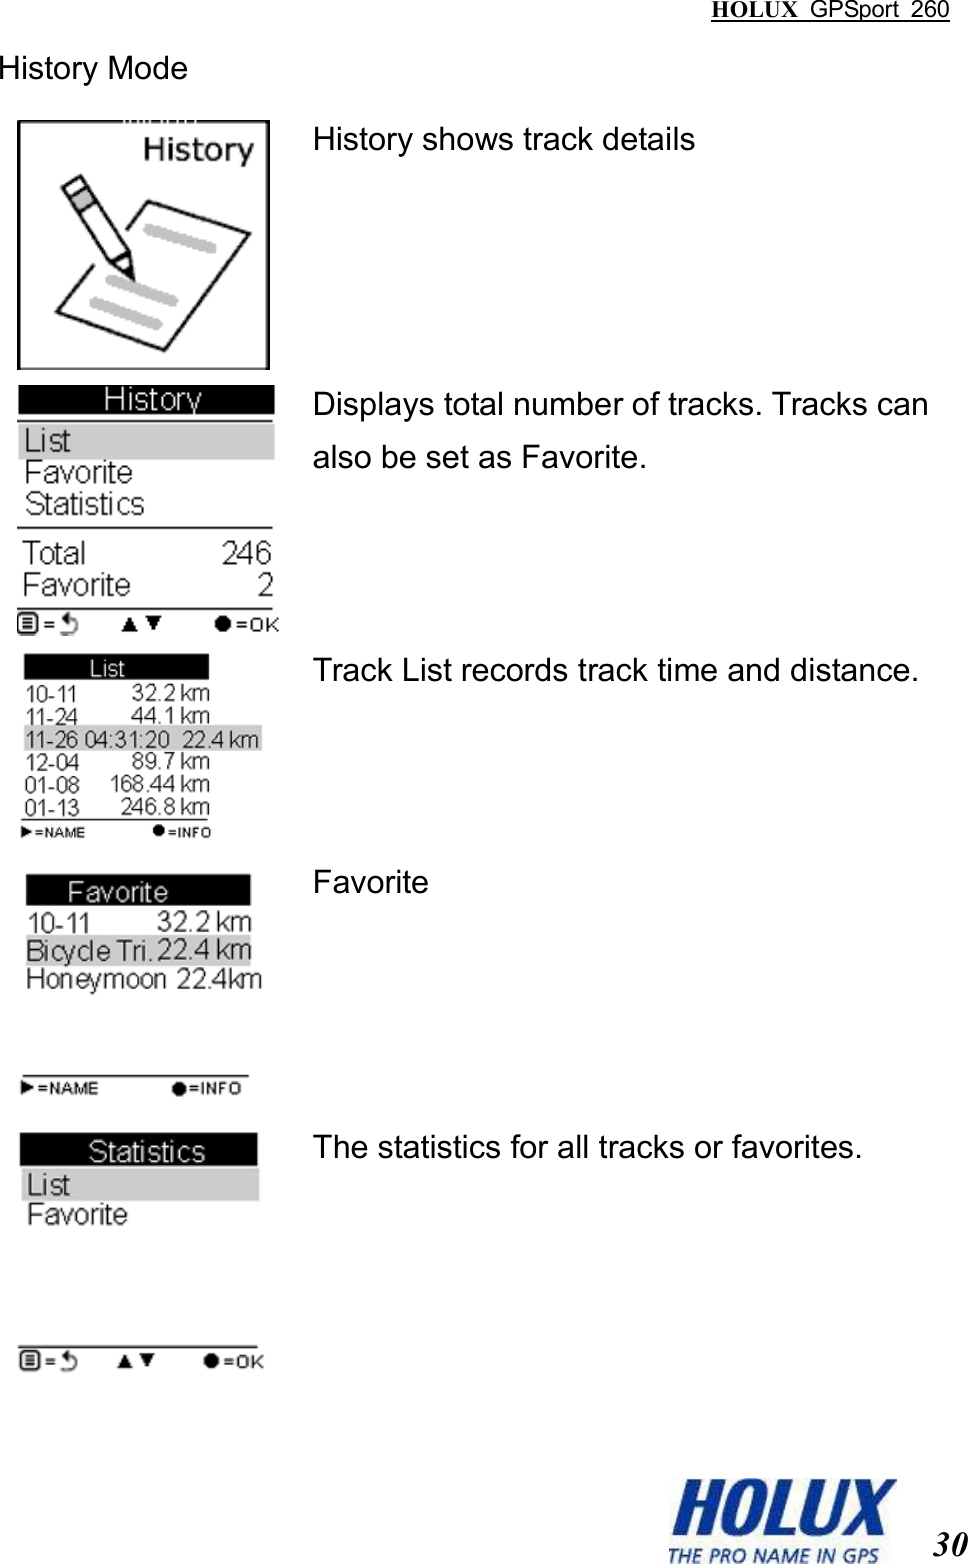 HOLUX  GPSport  260  30 History Mode  History shows track details  Displays total number of tracks. Tracks can also be set as Favorite.  Track List records track time and distance.  Favorite  The statistics for all tracks or favorites. 